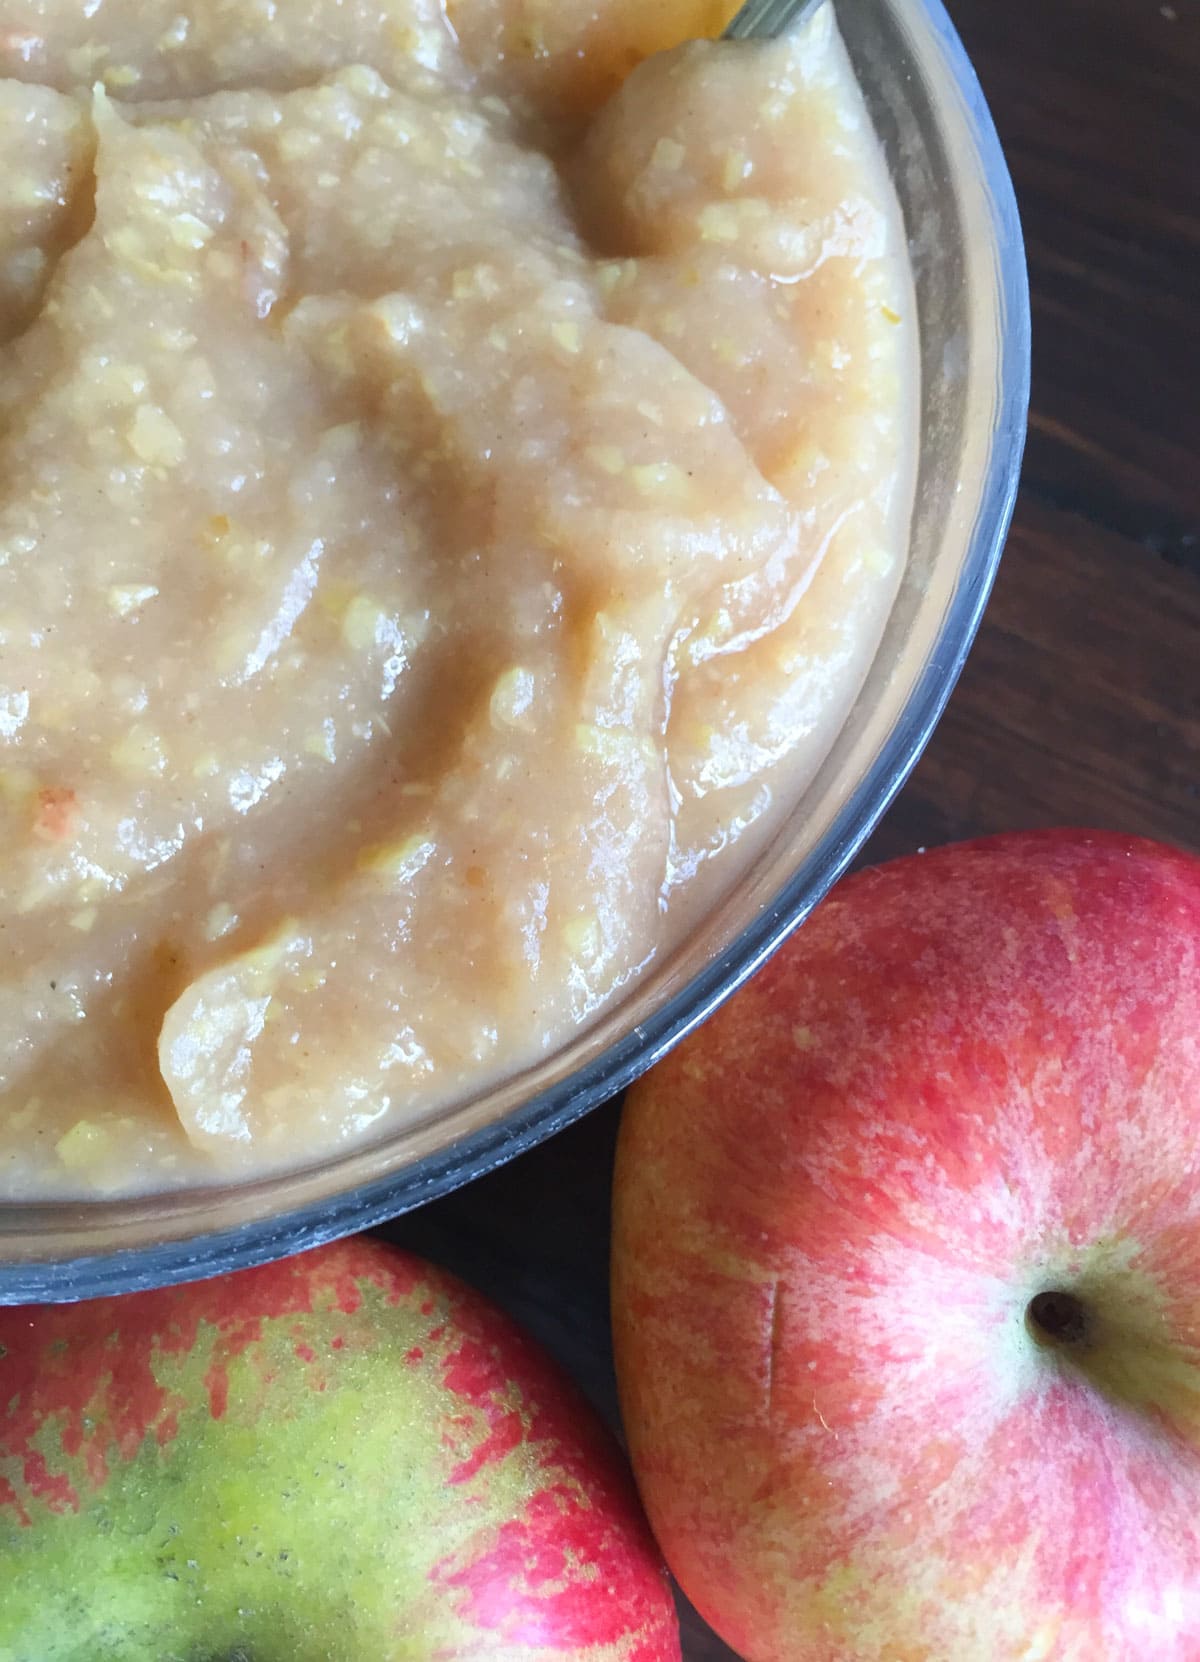 Unsweetened applesauce in a glass bowl with apples on the side.